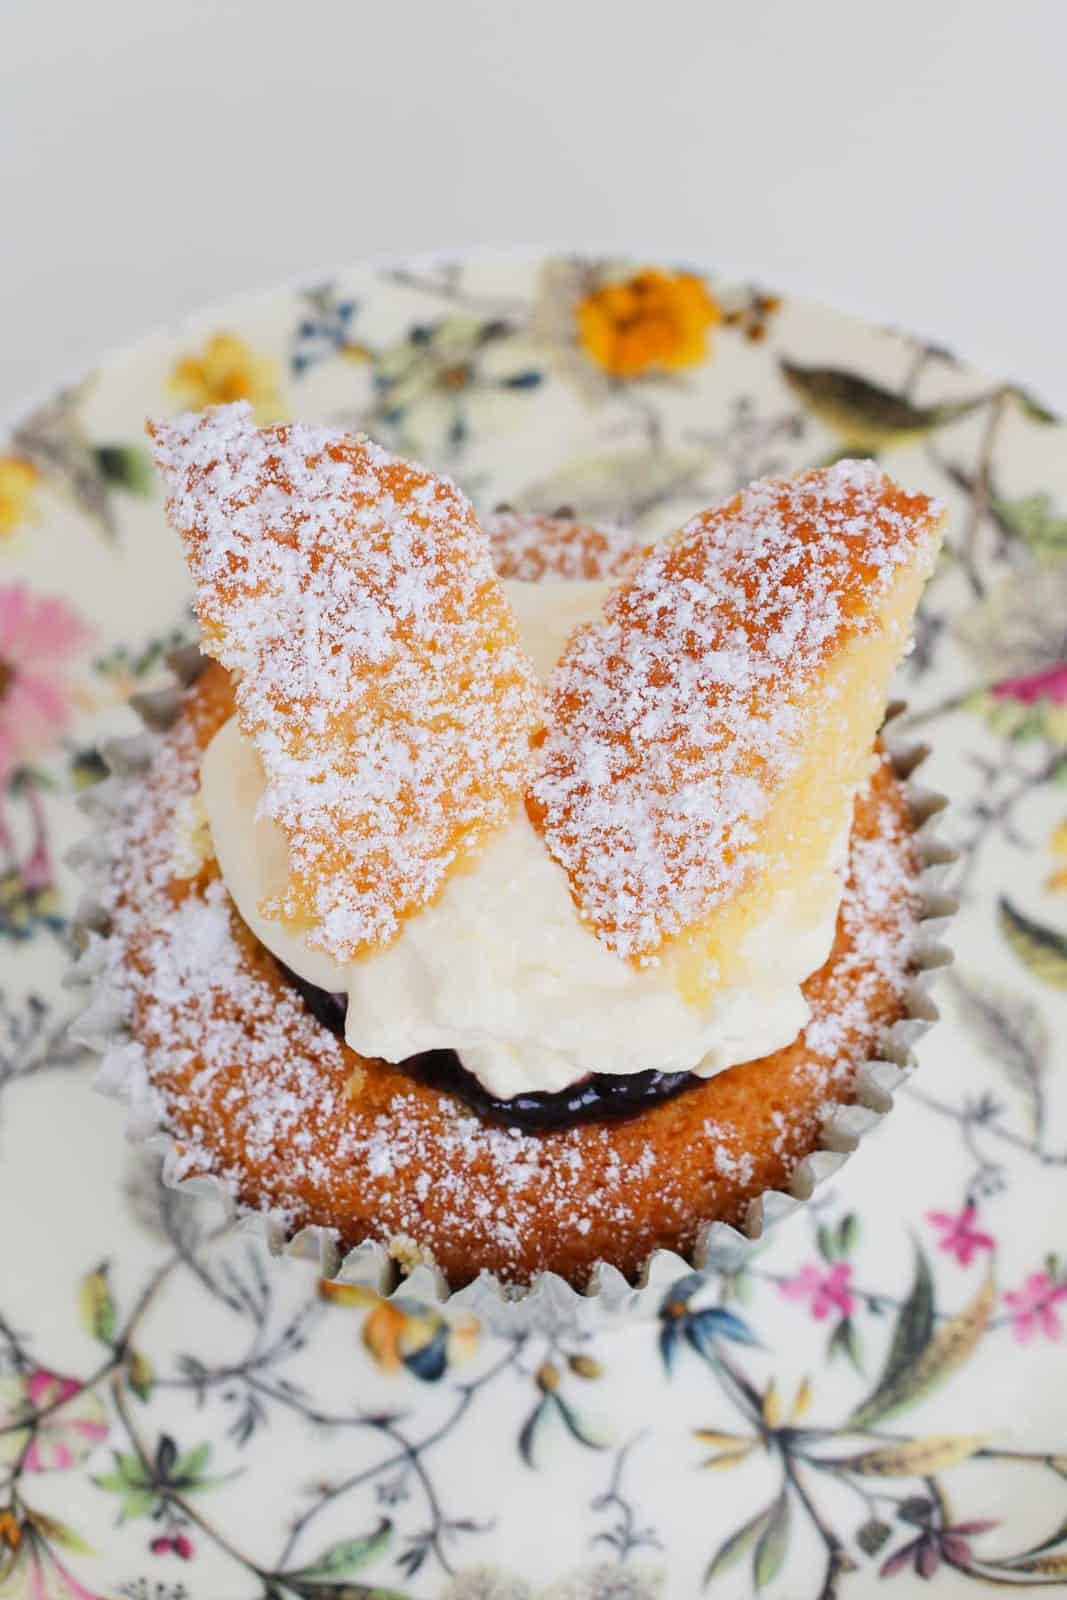 Icing sugar sprinkled over a fairy cake served on a floral plate.